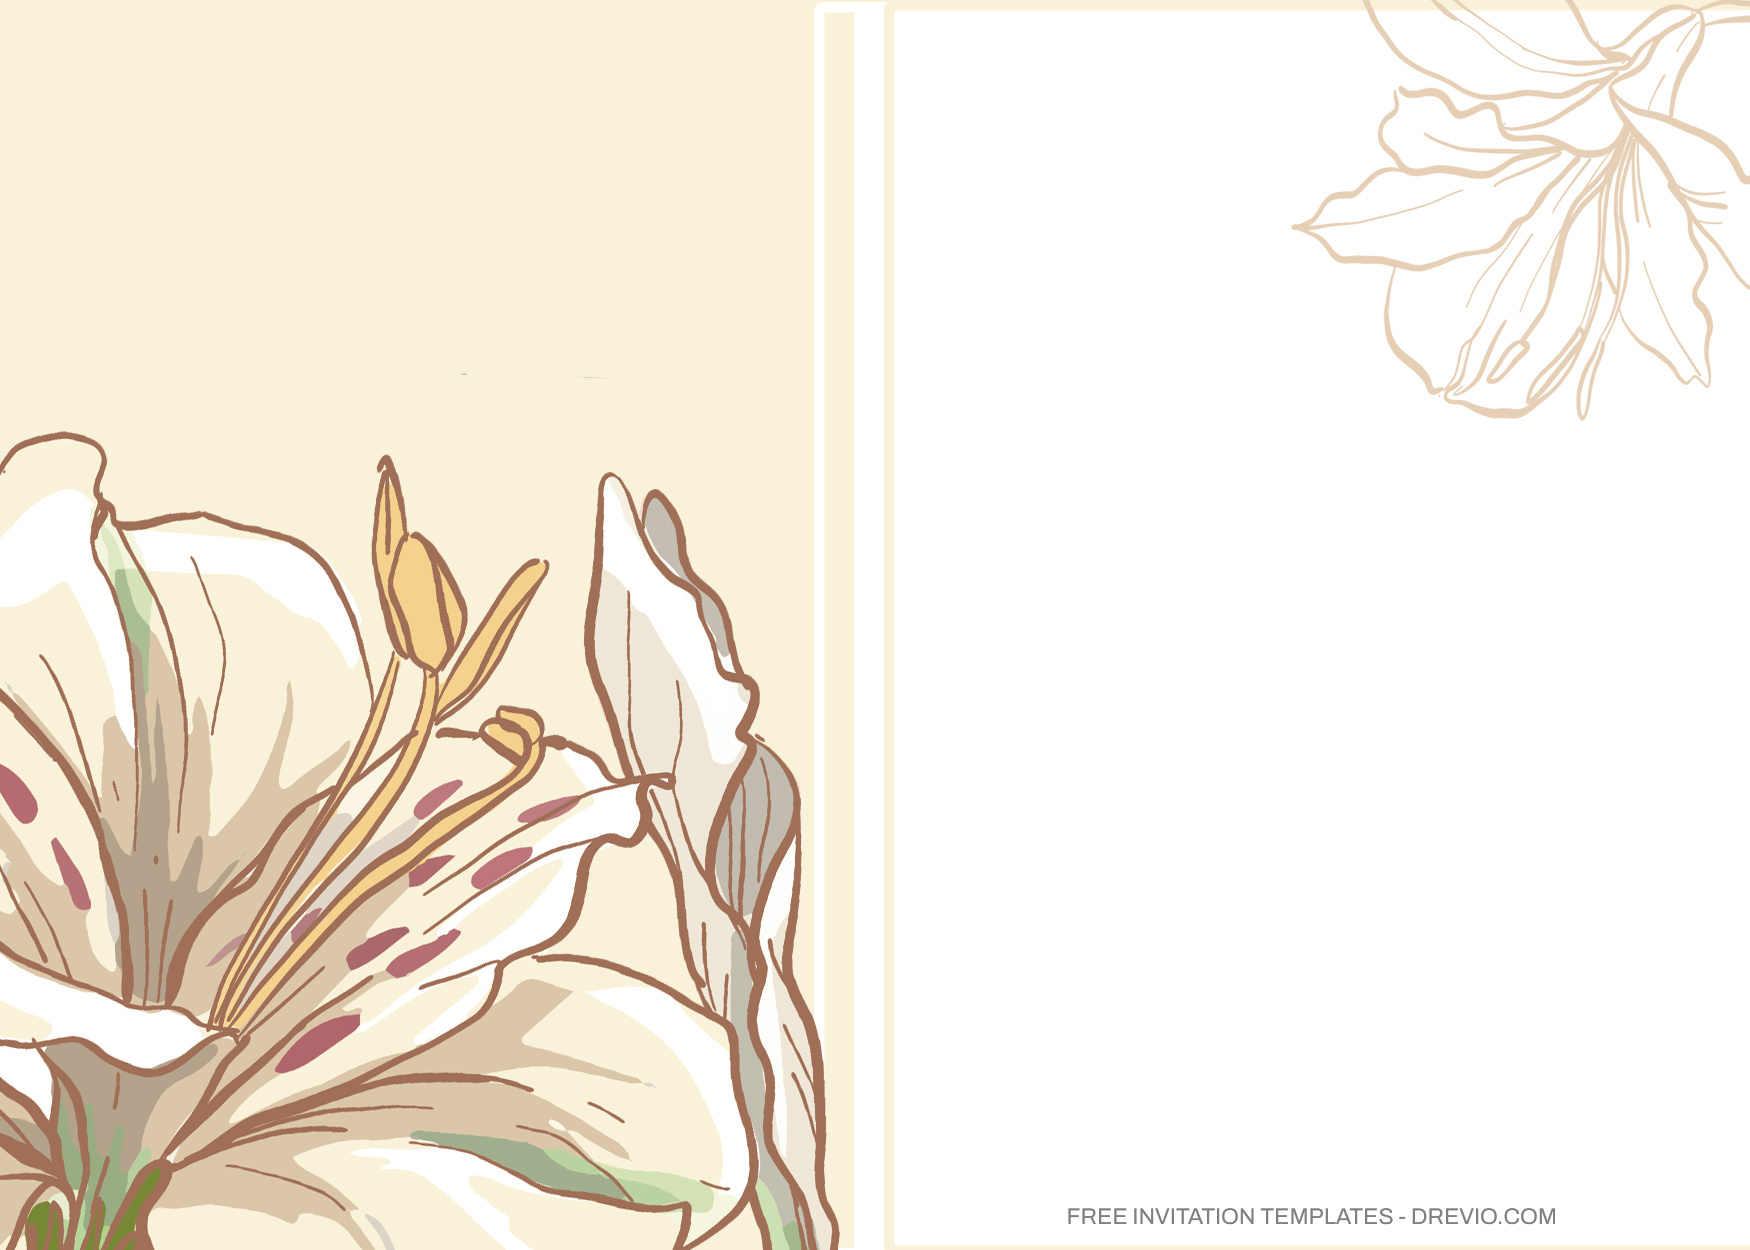 8+ Watercolor Brownish Lilies Floral Invitation Templates